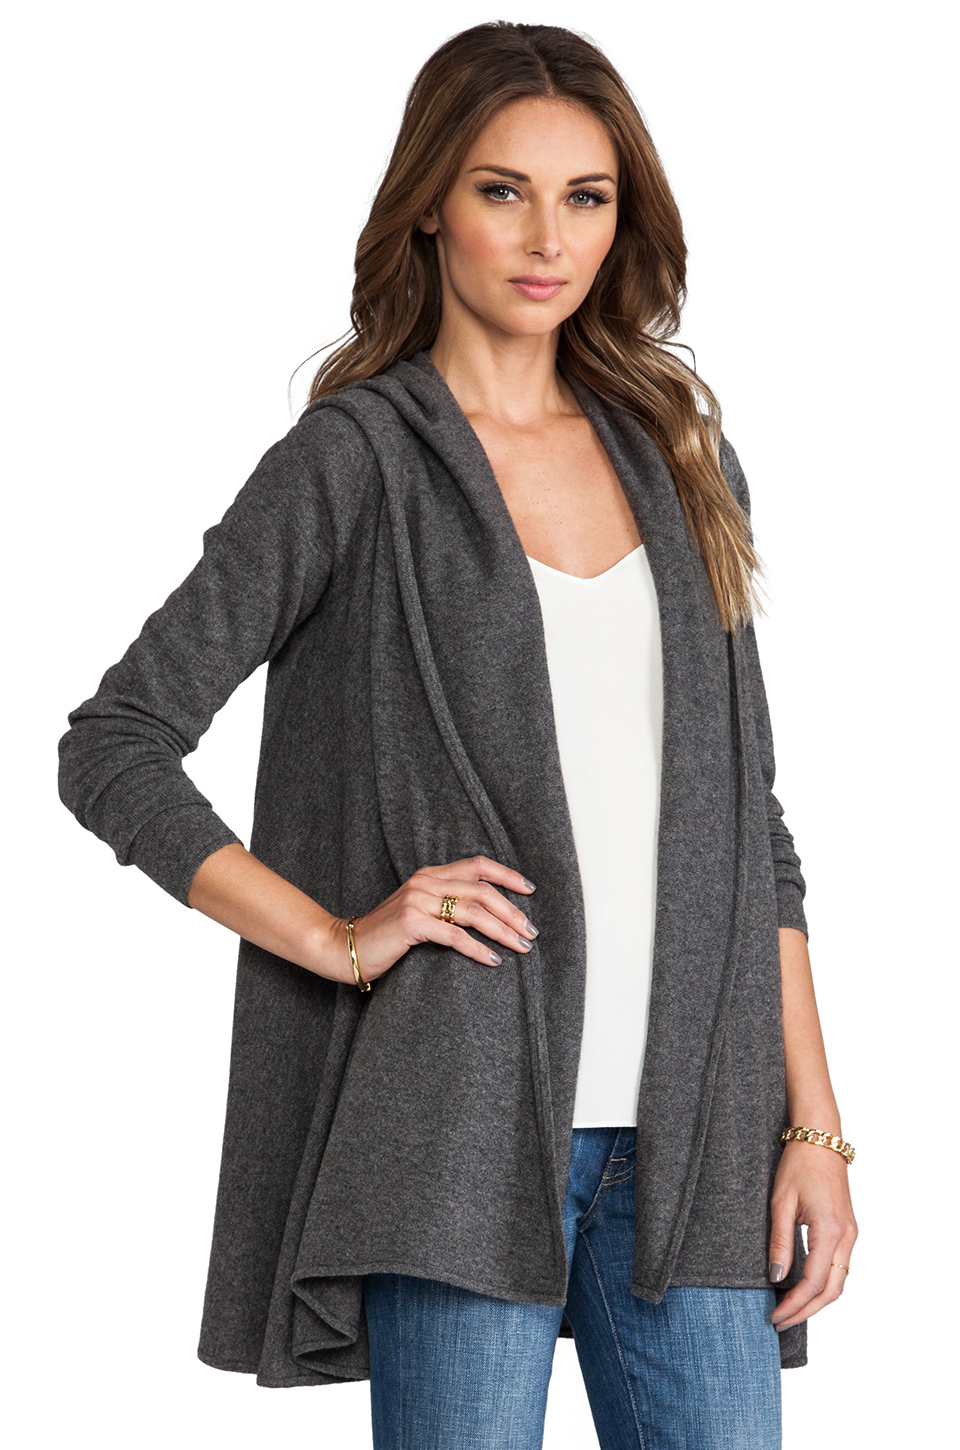 Lyst - Vince Cashmere Lux Hooded Drape Cardigan in Charcoal in Gray